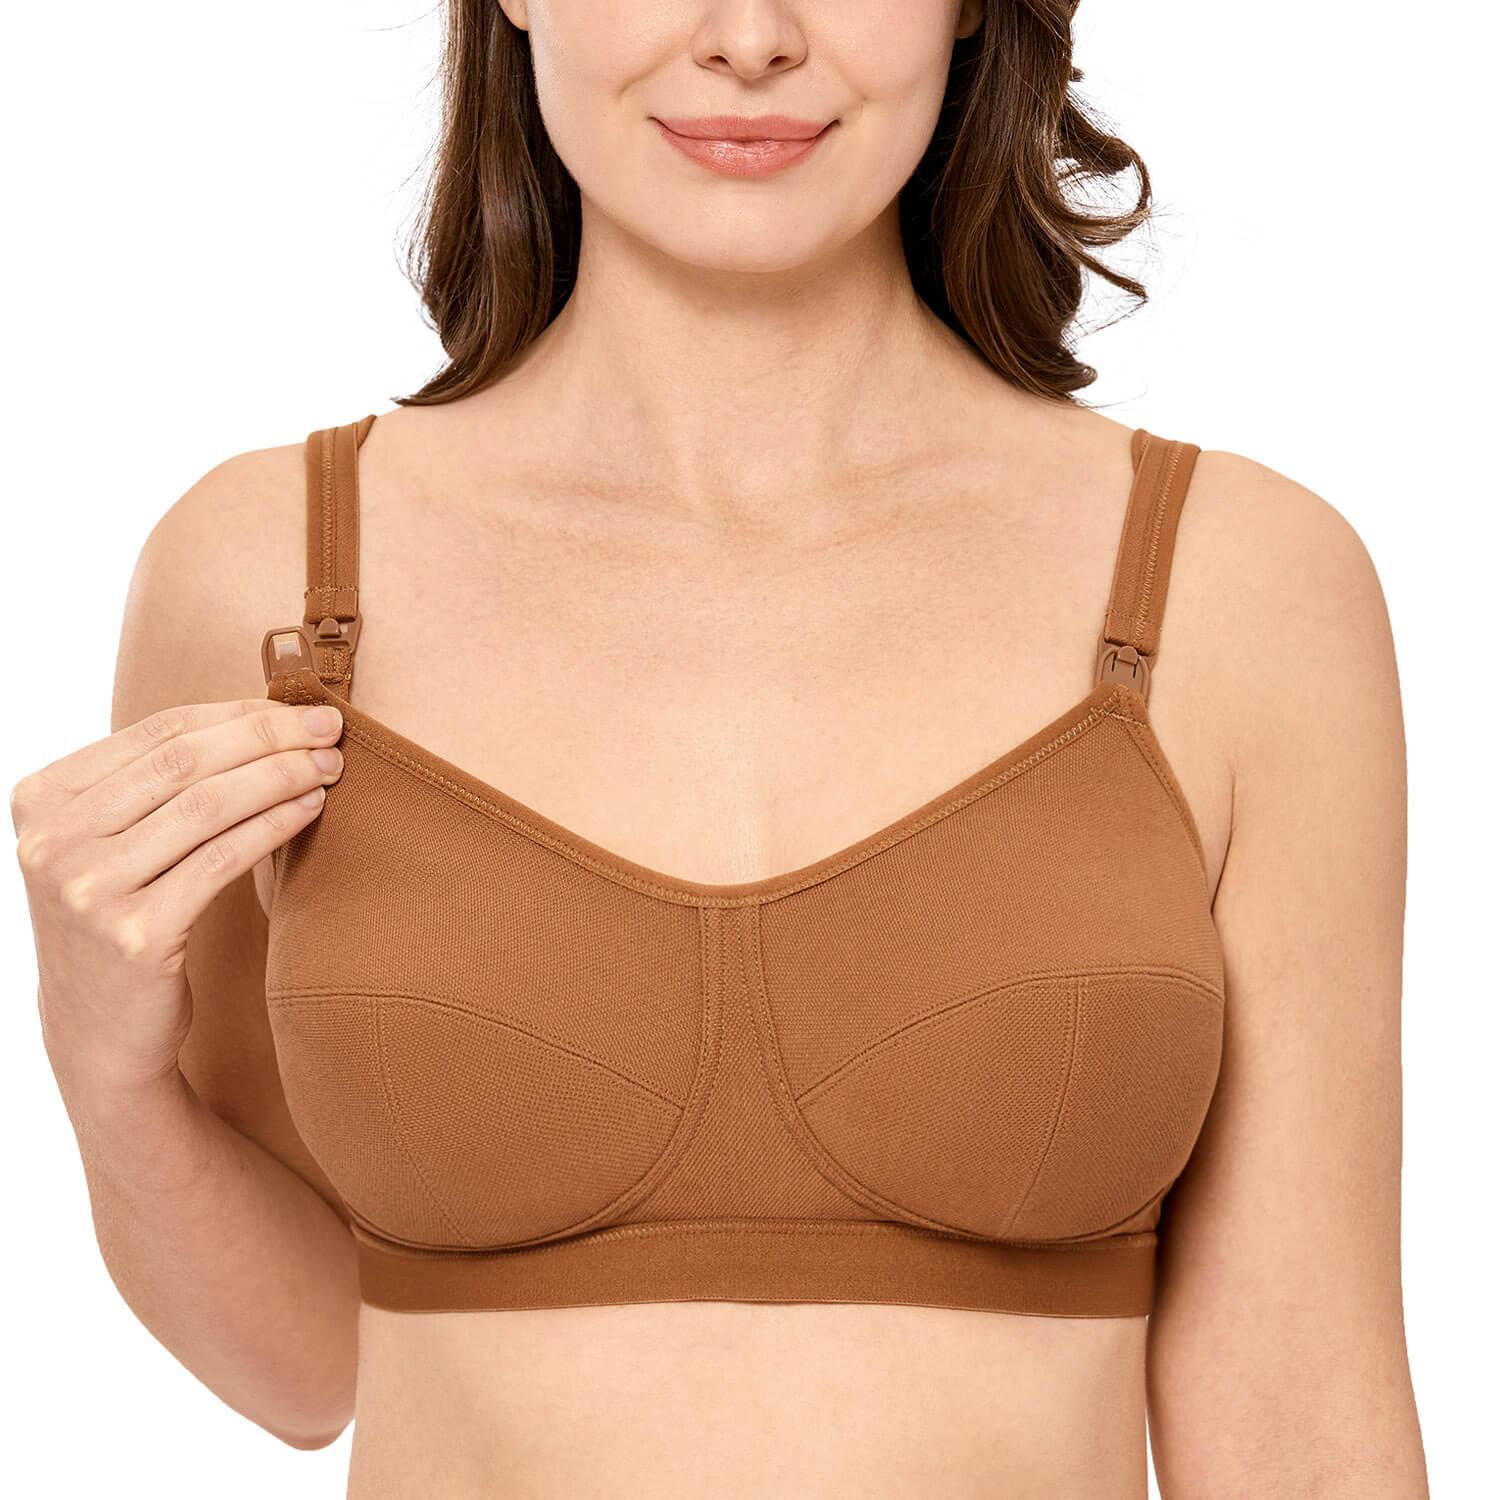 Best Nursing Bras For Large Breasts, by Lucy Guo